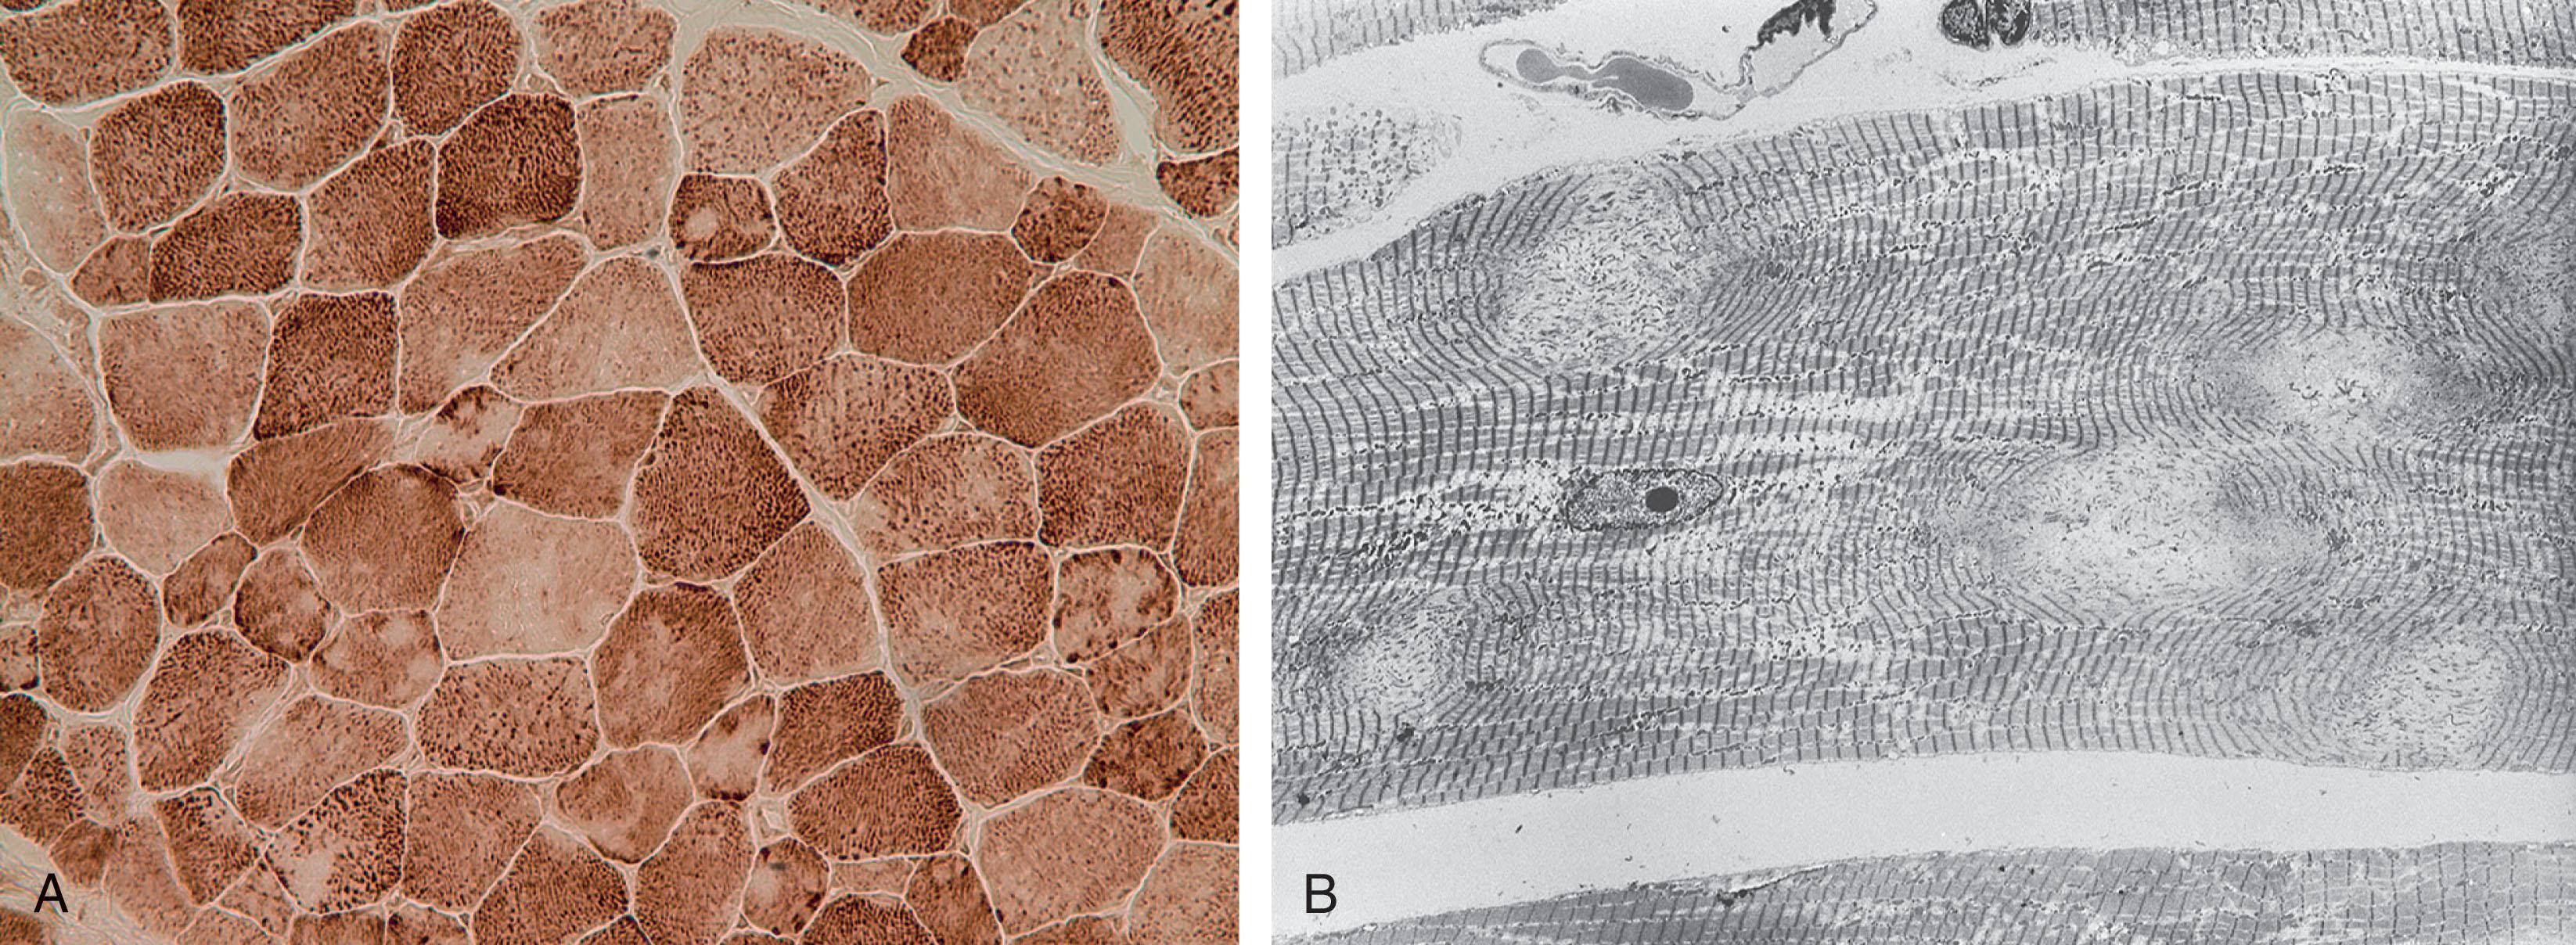 Fig. 37.19, Multiminicore myopathy . (A) Transverse section stained with NADH demonstrates foci of decreased oxidative enzyme activity throughout the muscle fiber. (B) Low-power electron microscopic view of longitudinal muscle sections demonstrates focal loss of cross striations, corresponding to areas of decreased mitochondrial enzyme activity.